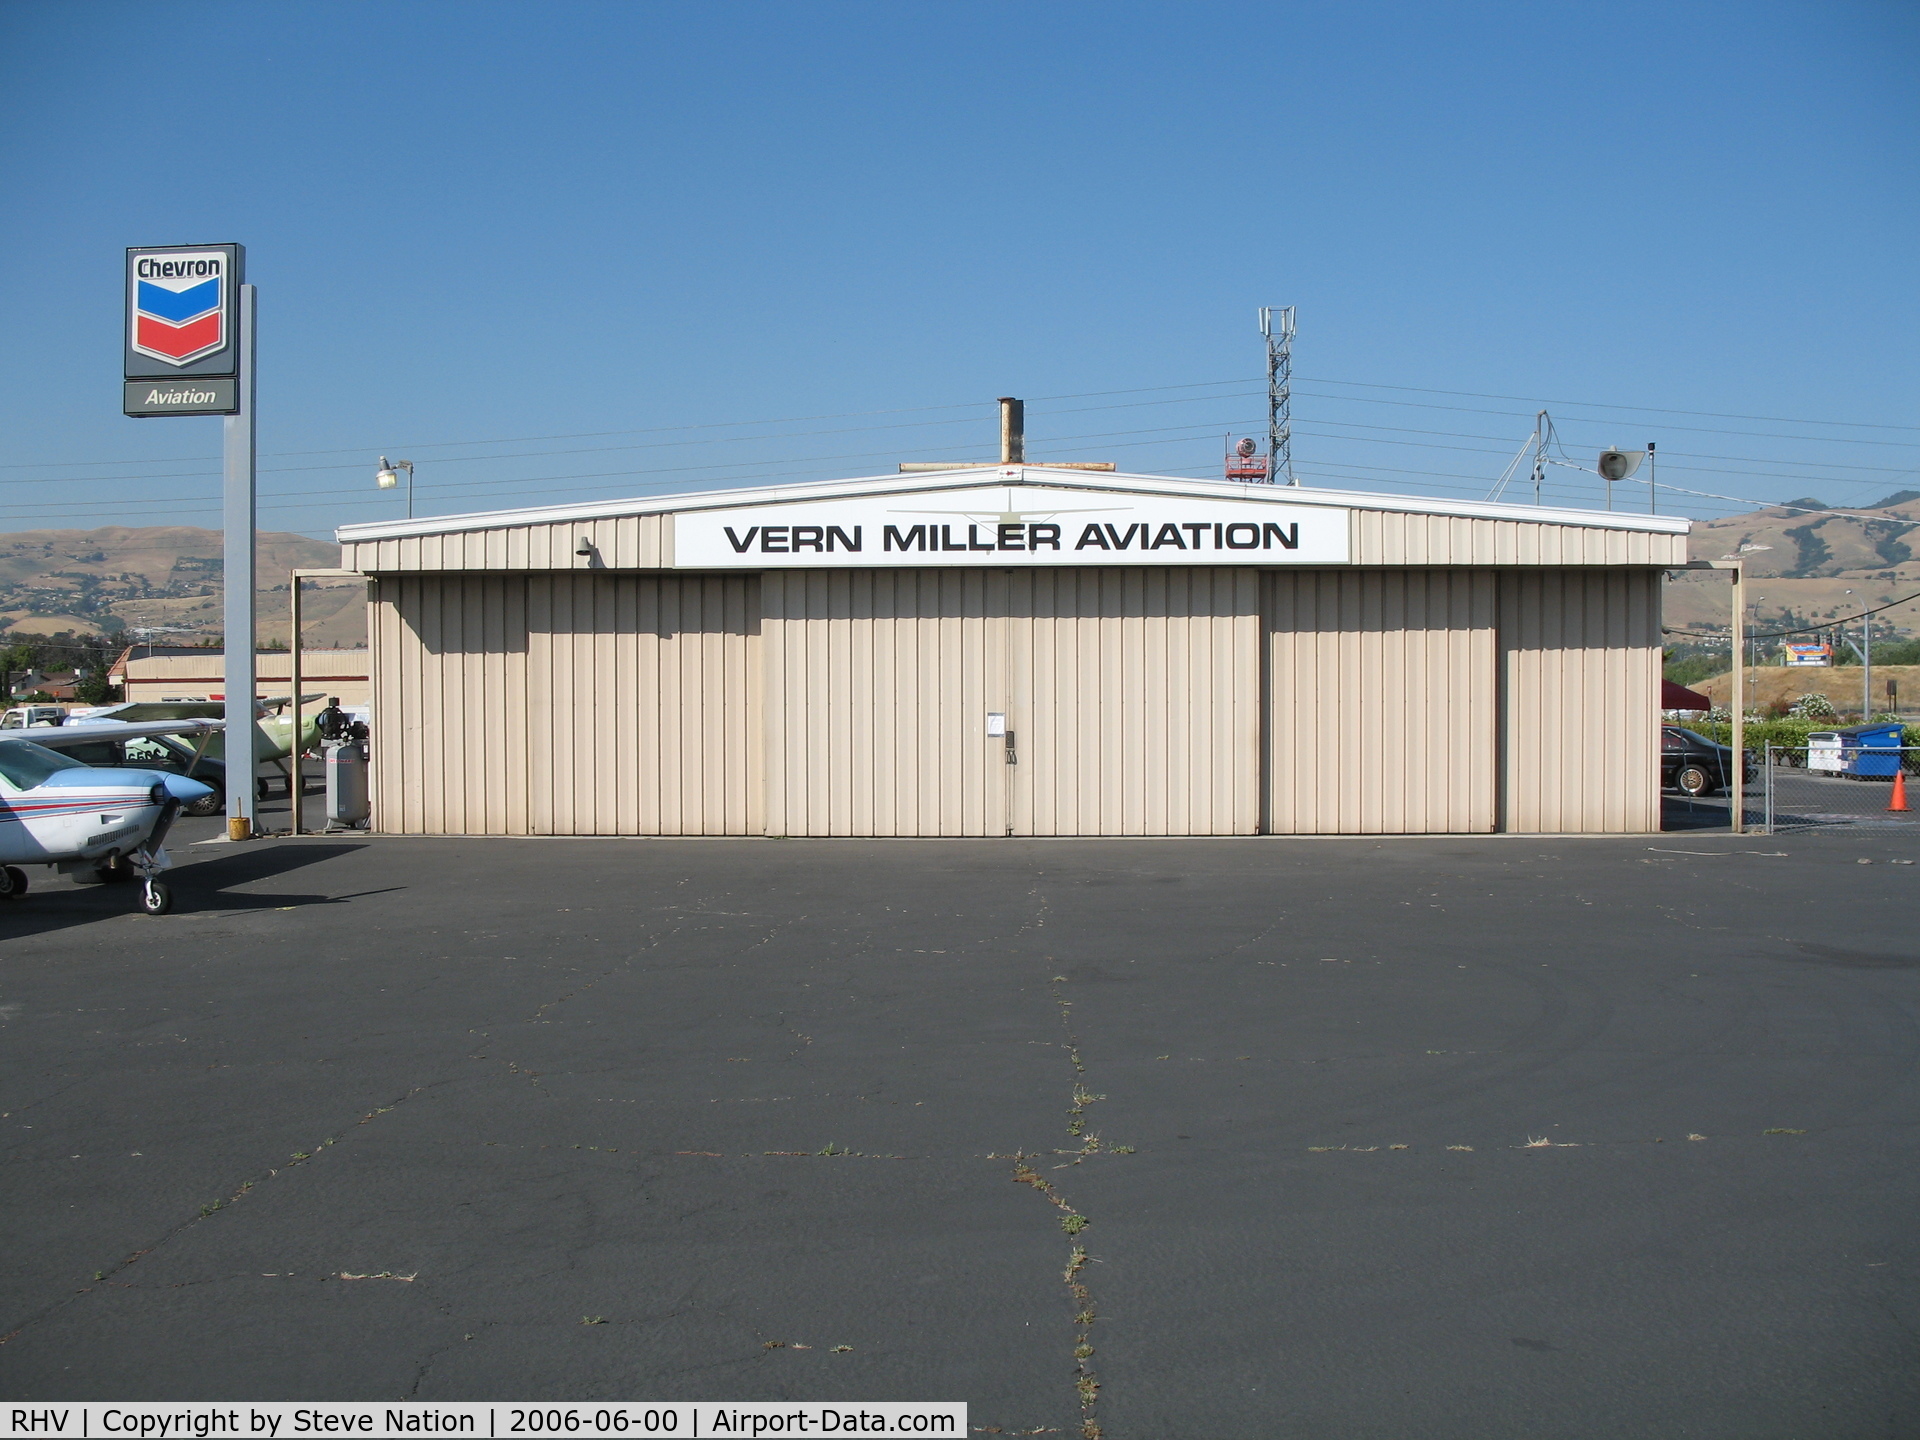 Reid-hillview Of Santa Clara County Airport (RHV) - Vern Miller Aviation hangar (Vern and his wife Elizabeth and two friends died tragically in the crash of Vern's 1955 Cessna 180 along the Rogue River in OR on Saturday, June 17, 2006)